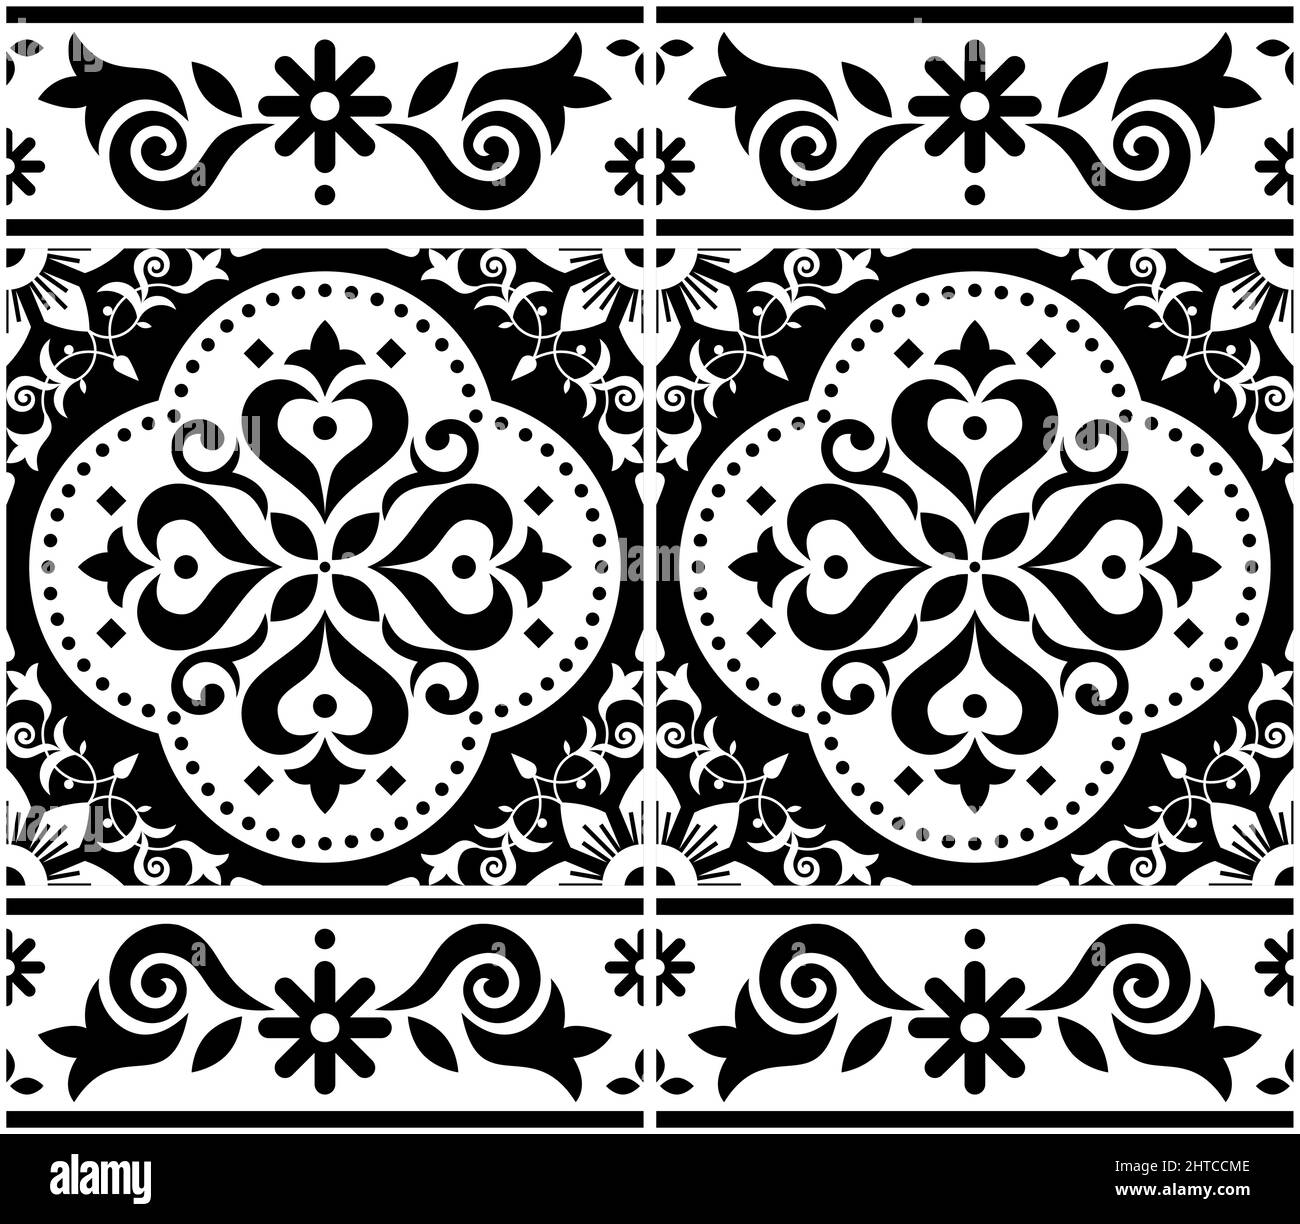 Lisbon, Portuguese style Azulejo tile seamless vector pattern with frame or border, decorative wallpaper or textile, black and white fabric print with Stock Vector